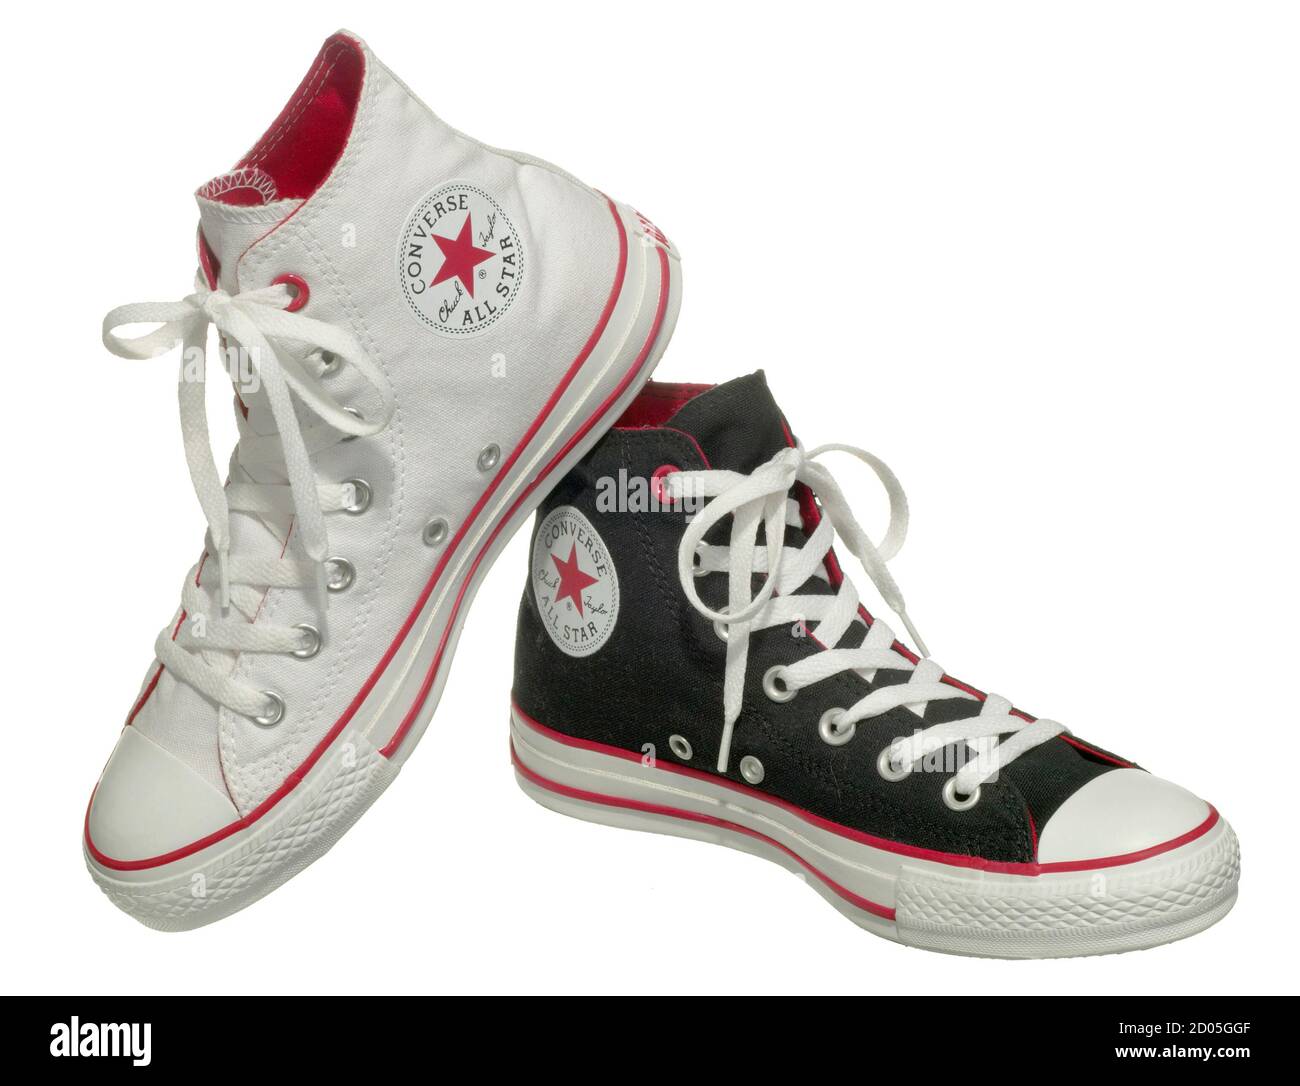 One black and one white converse shoe with red details and white laces  photographed on a white background Stock Photo - Alamy